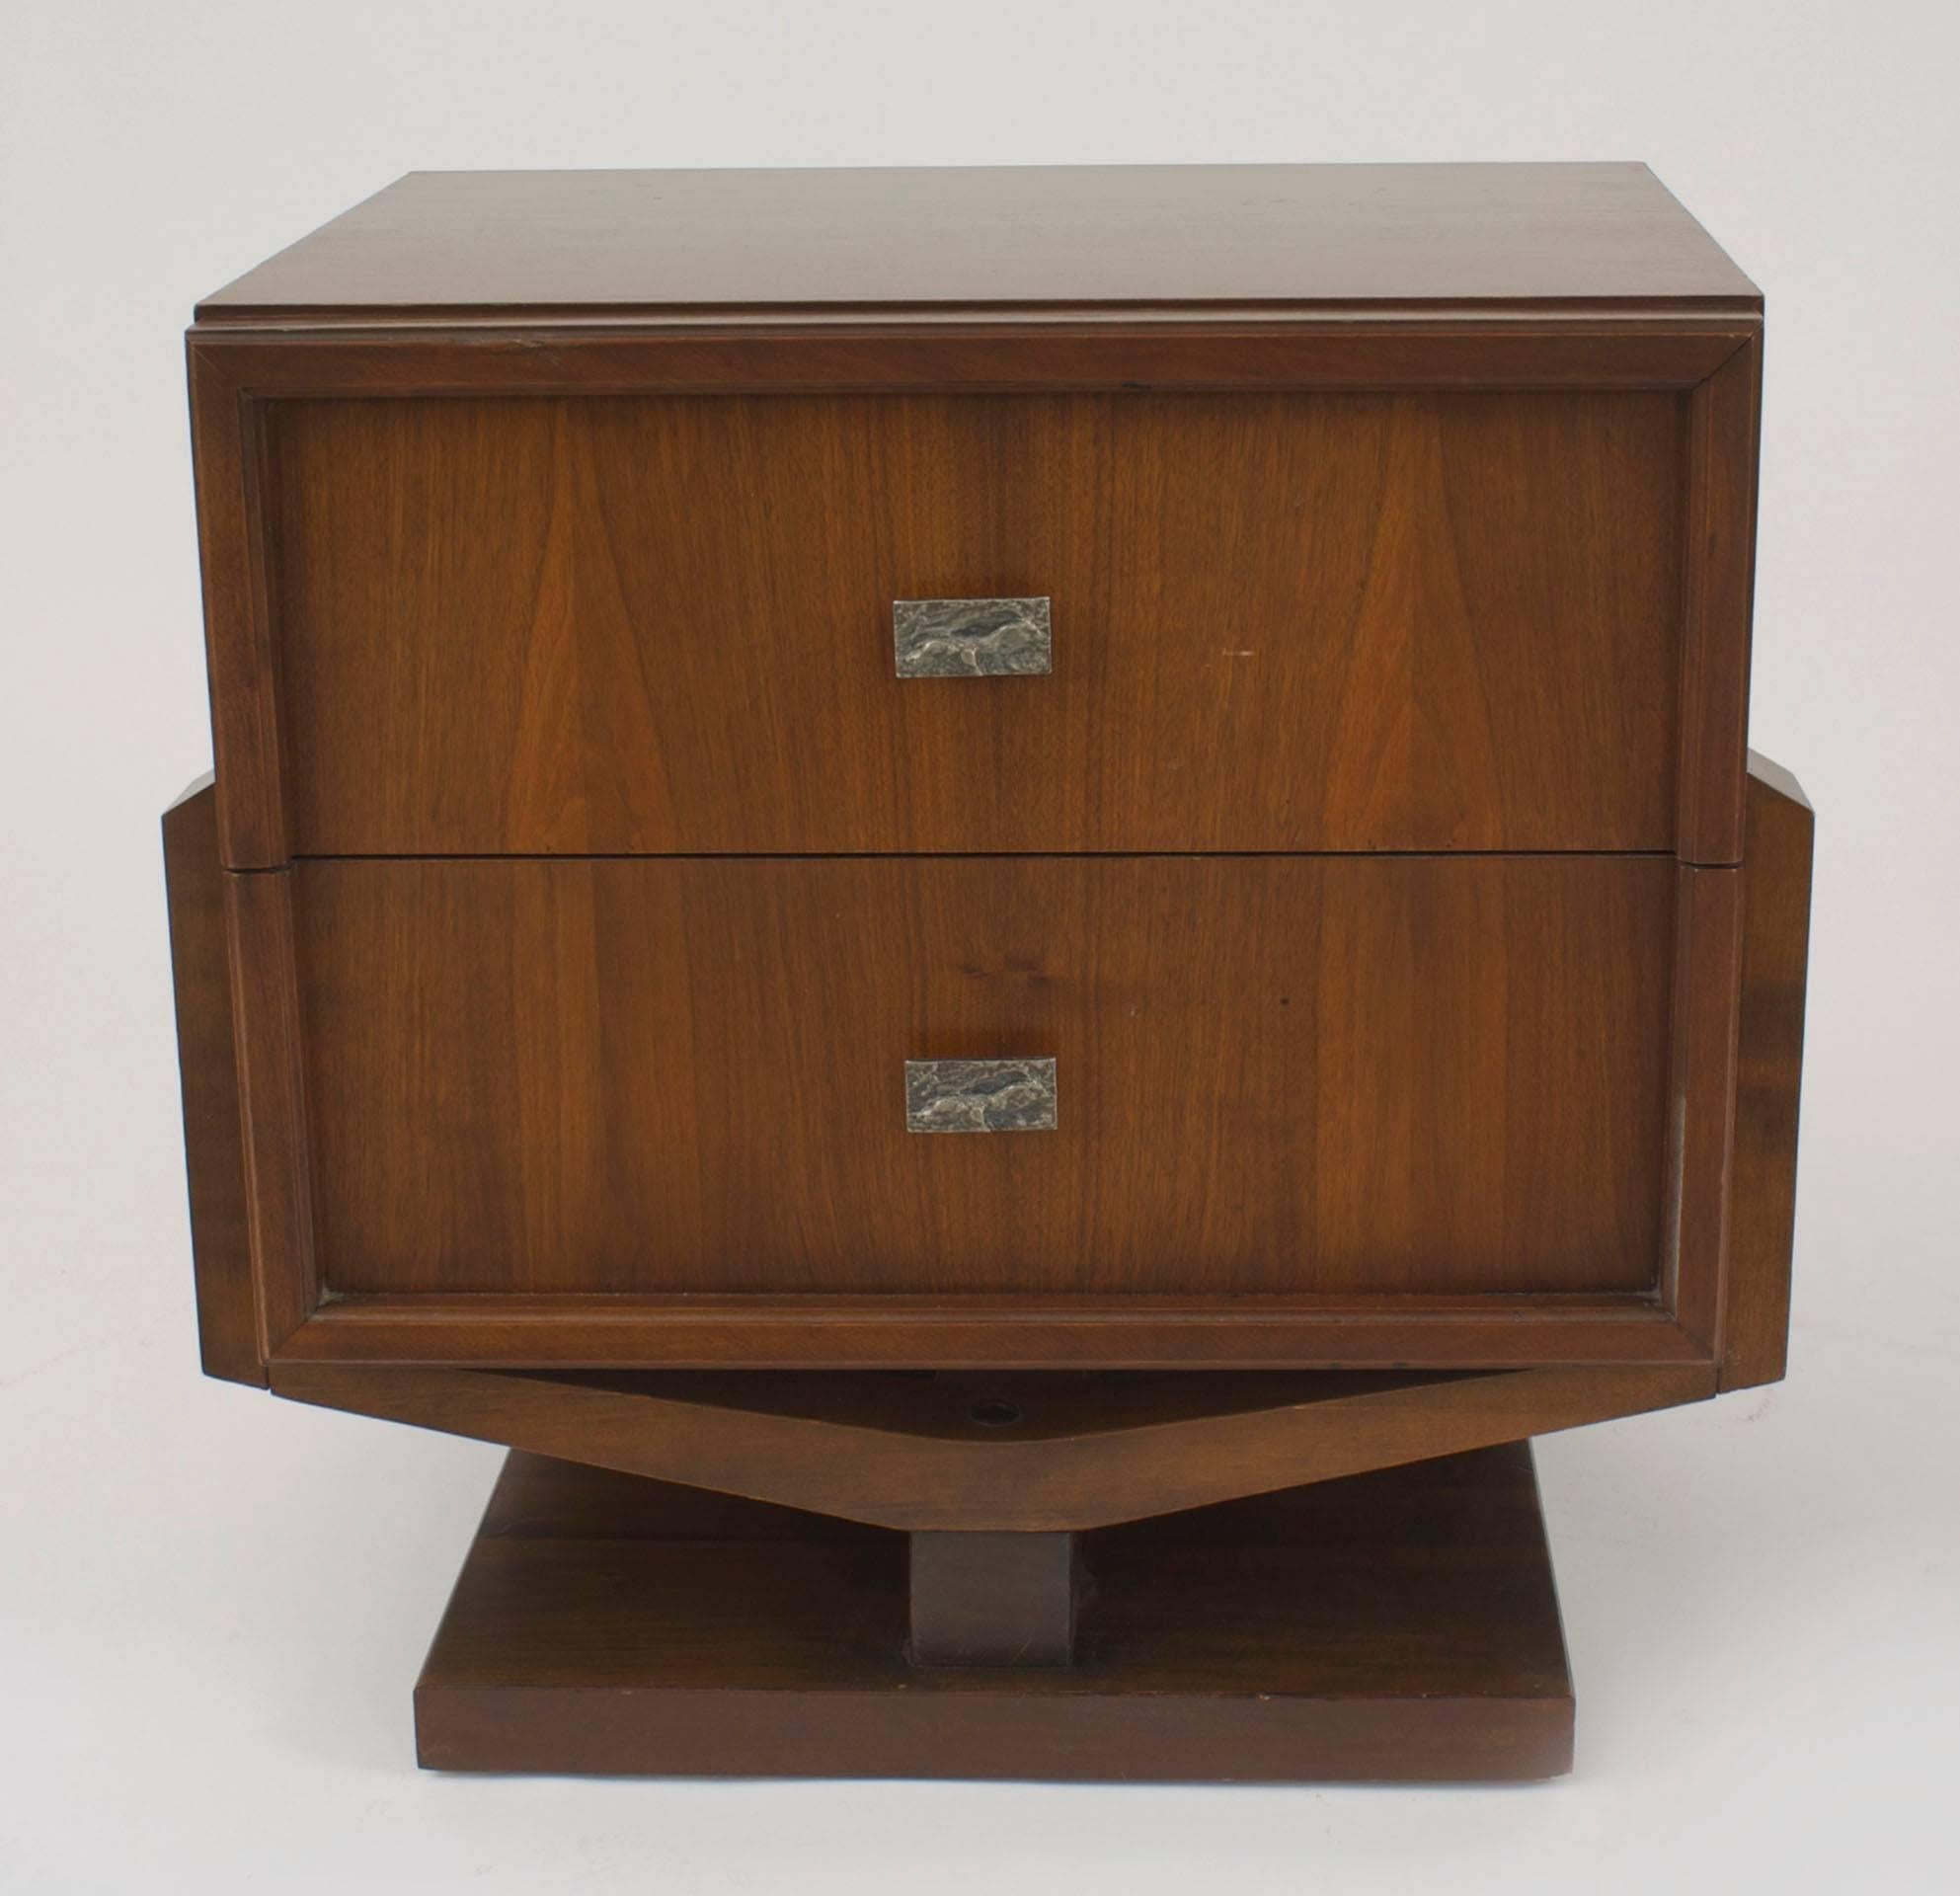 American Mid-Century (1970s) Brutalist style walnut bedside table (commode) with two-drawer and metal hardware.